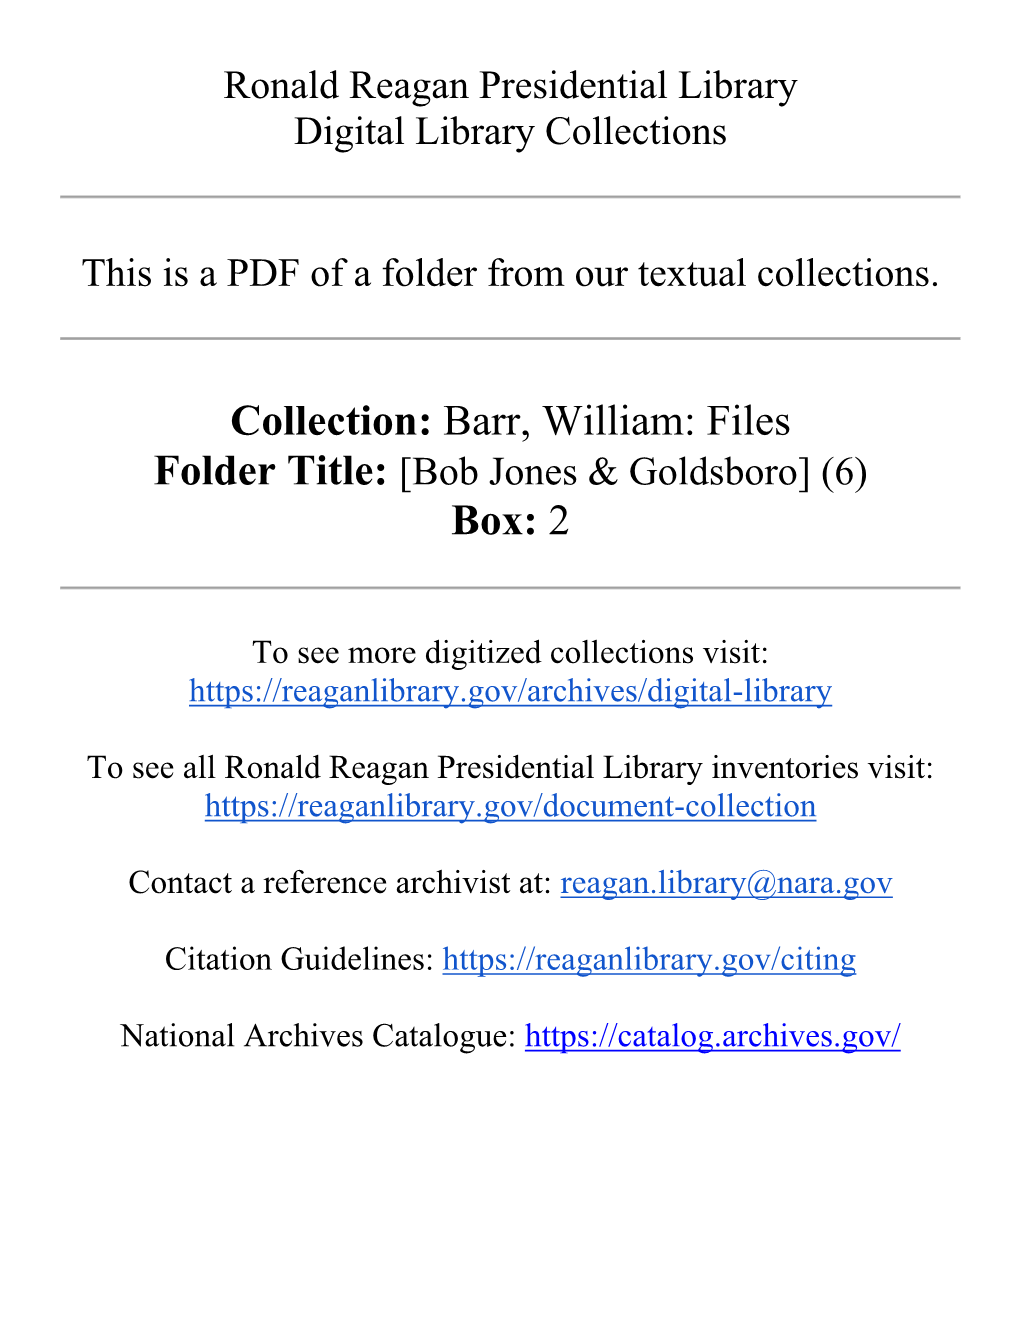 Collection: Barr, William: Files Box: 2